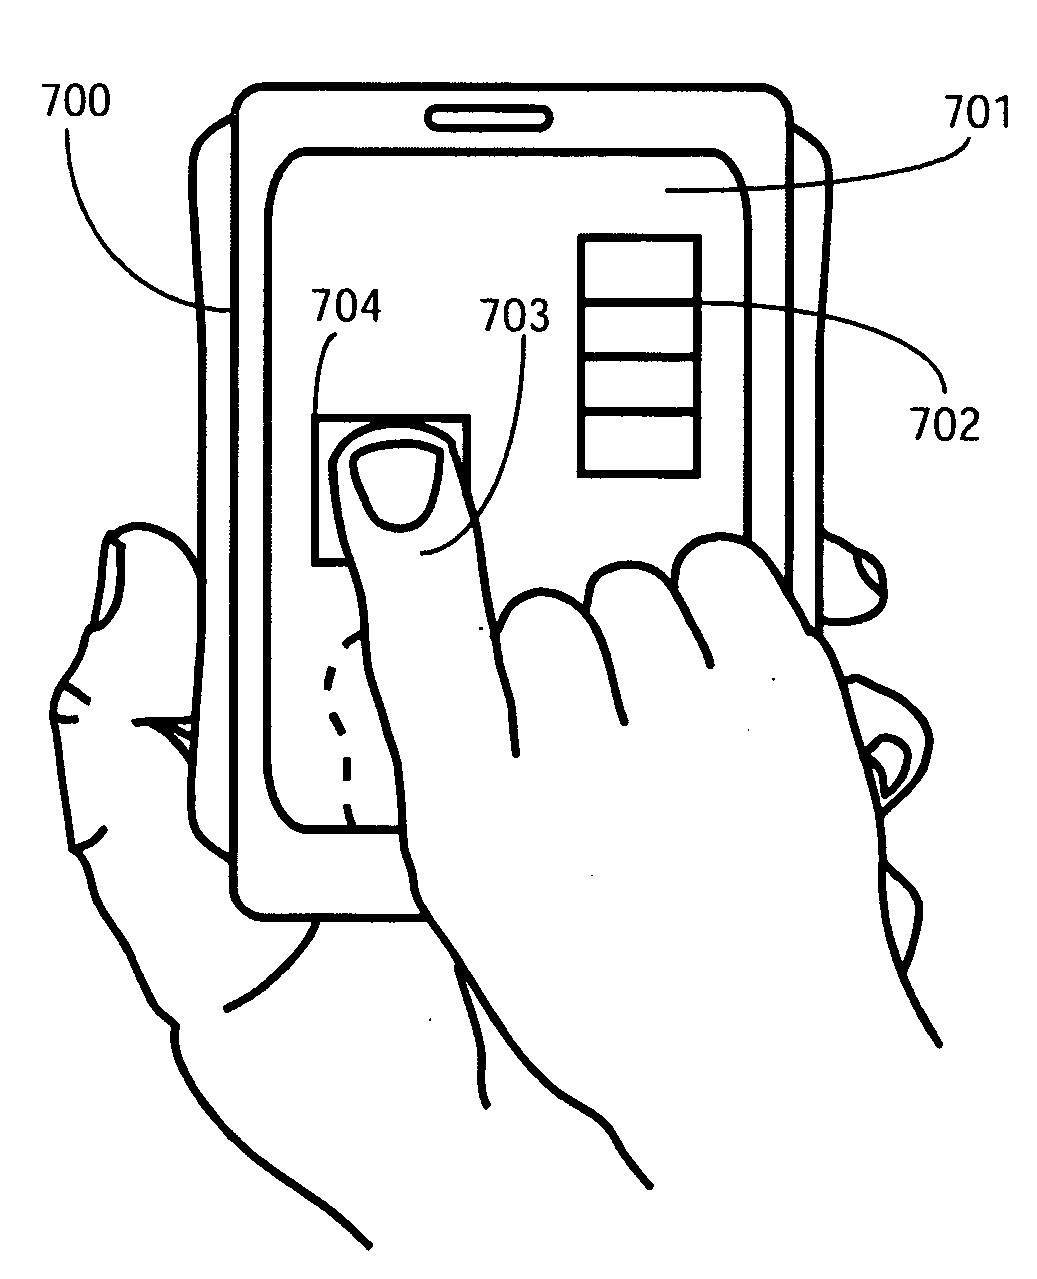 Menu Configuration System and Method for Display on an Electronic Device